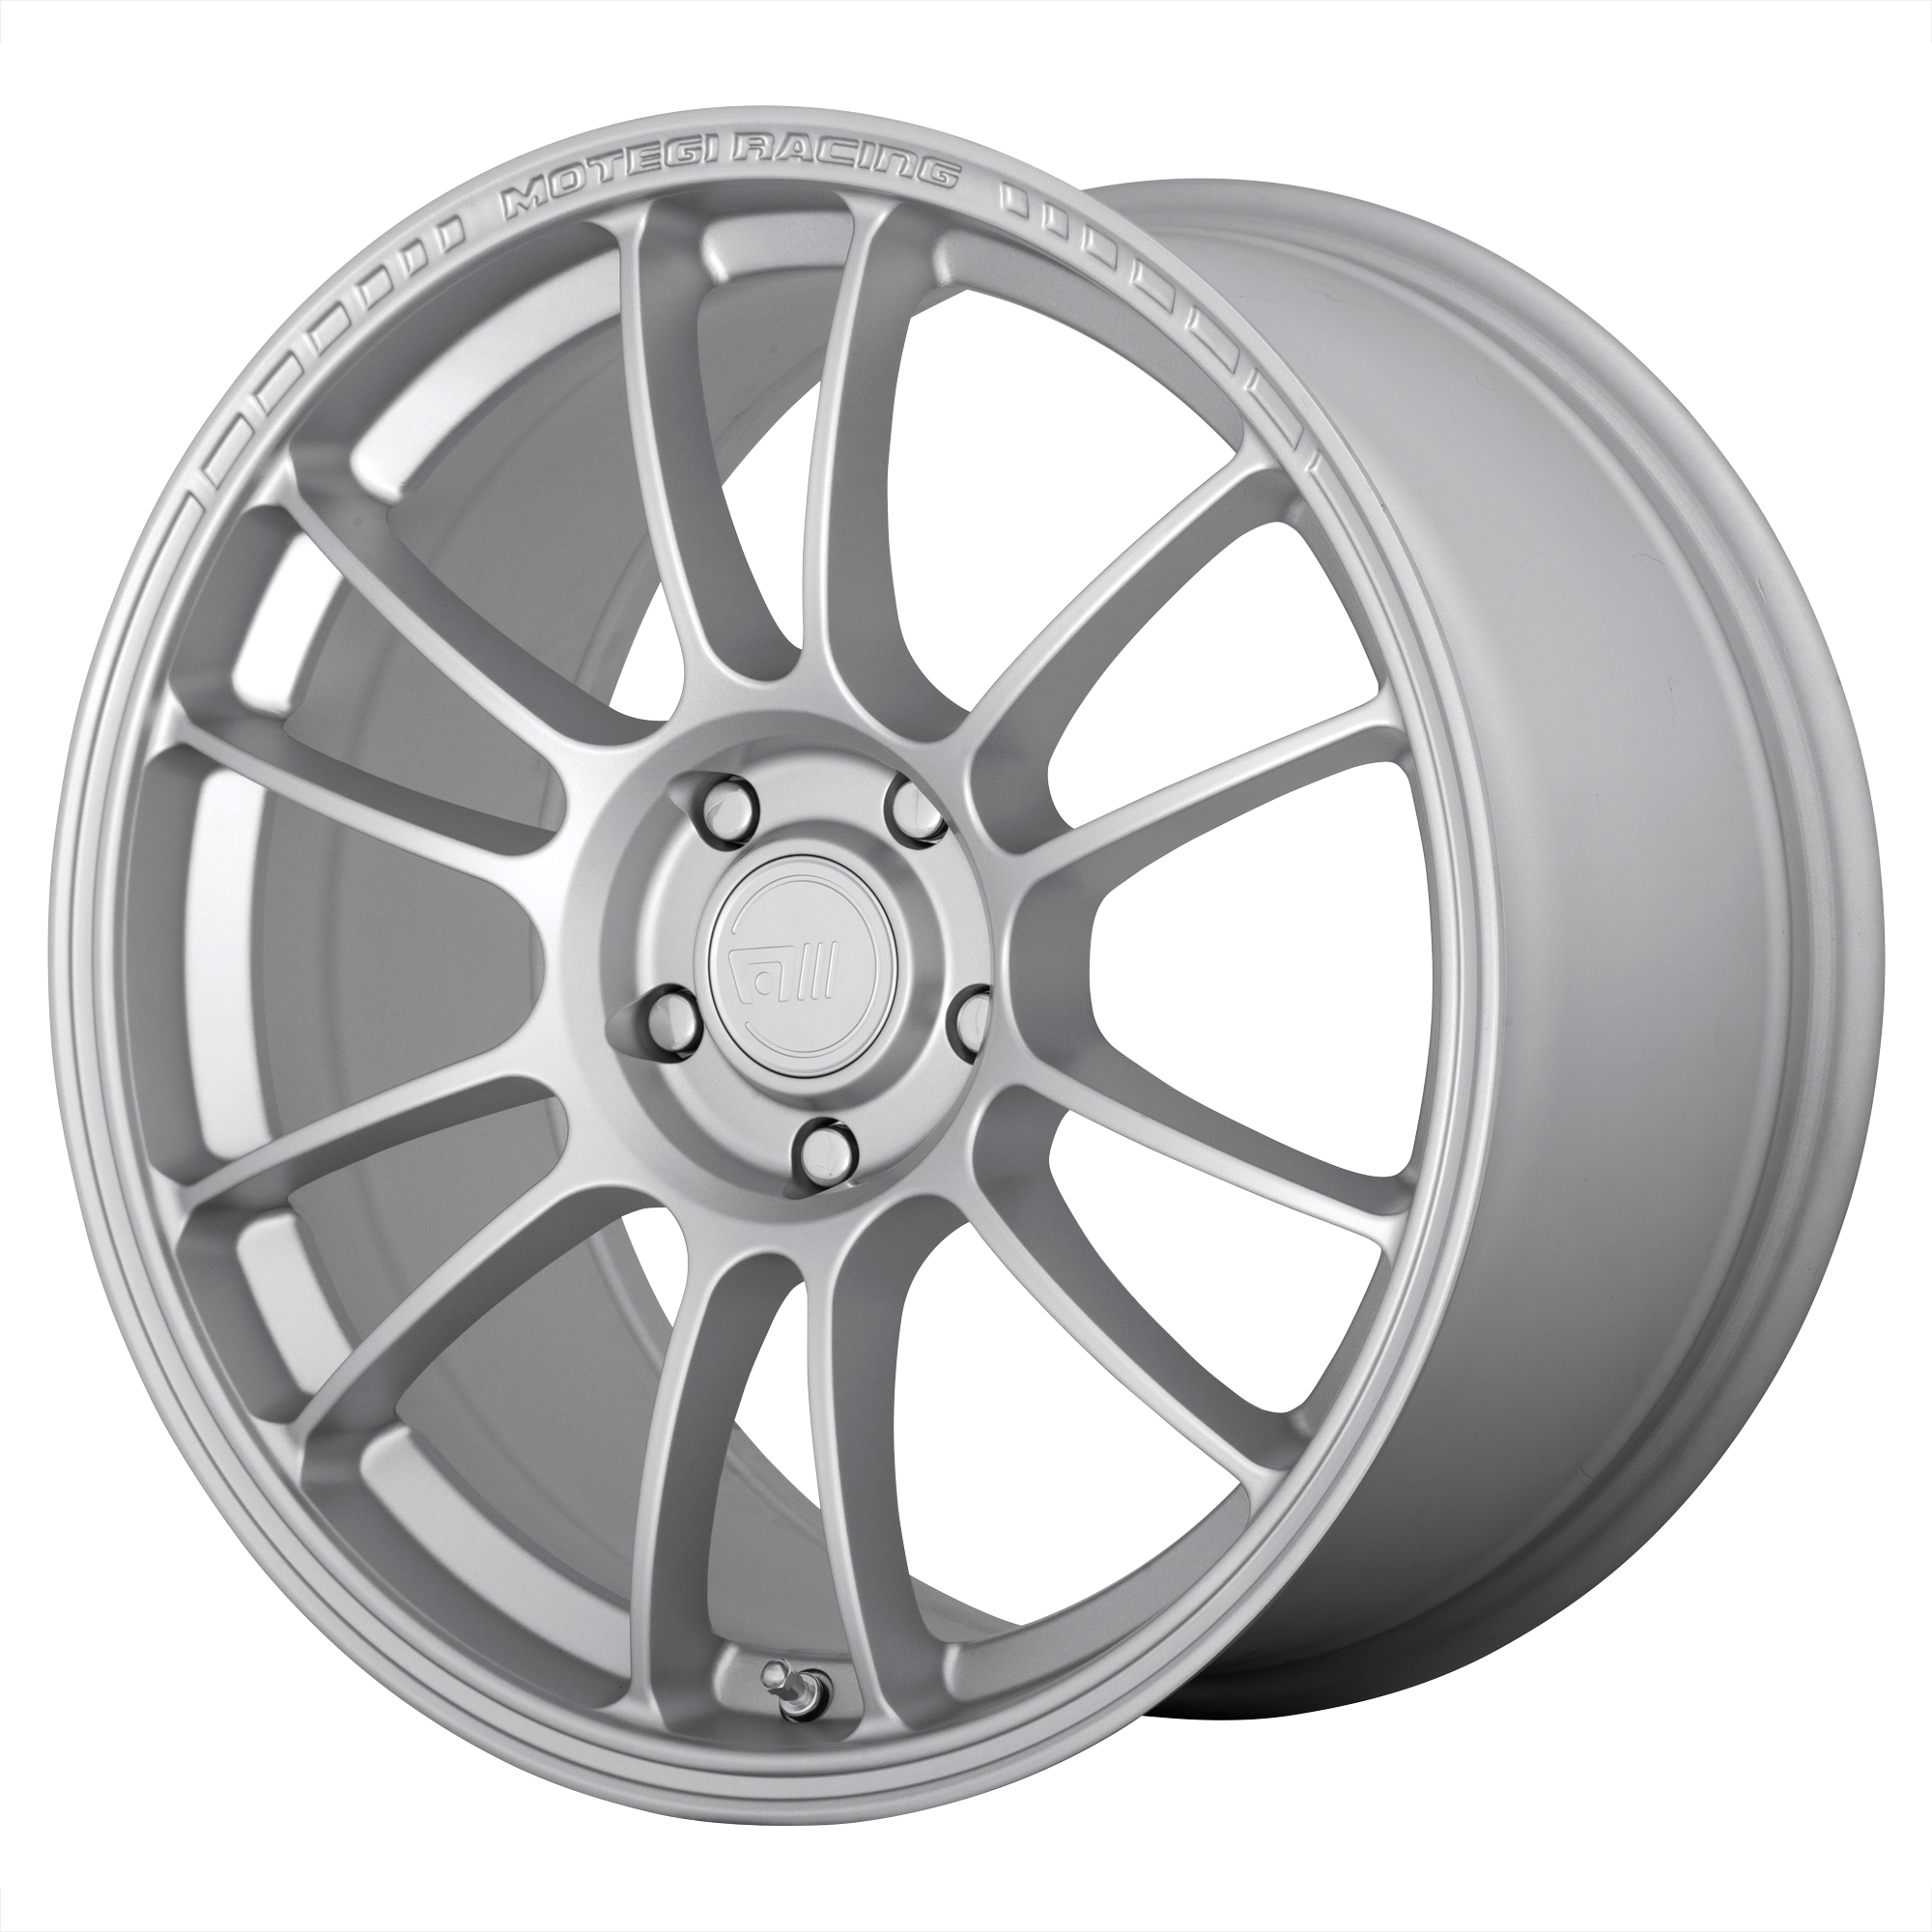 SS6 18x9.5 5x100.00 HYPER SILVER (45 mm) - Tires and Engine Performance